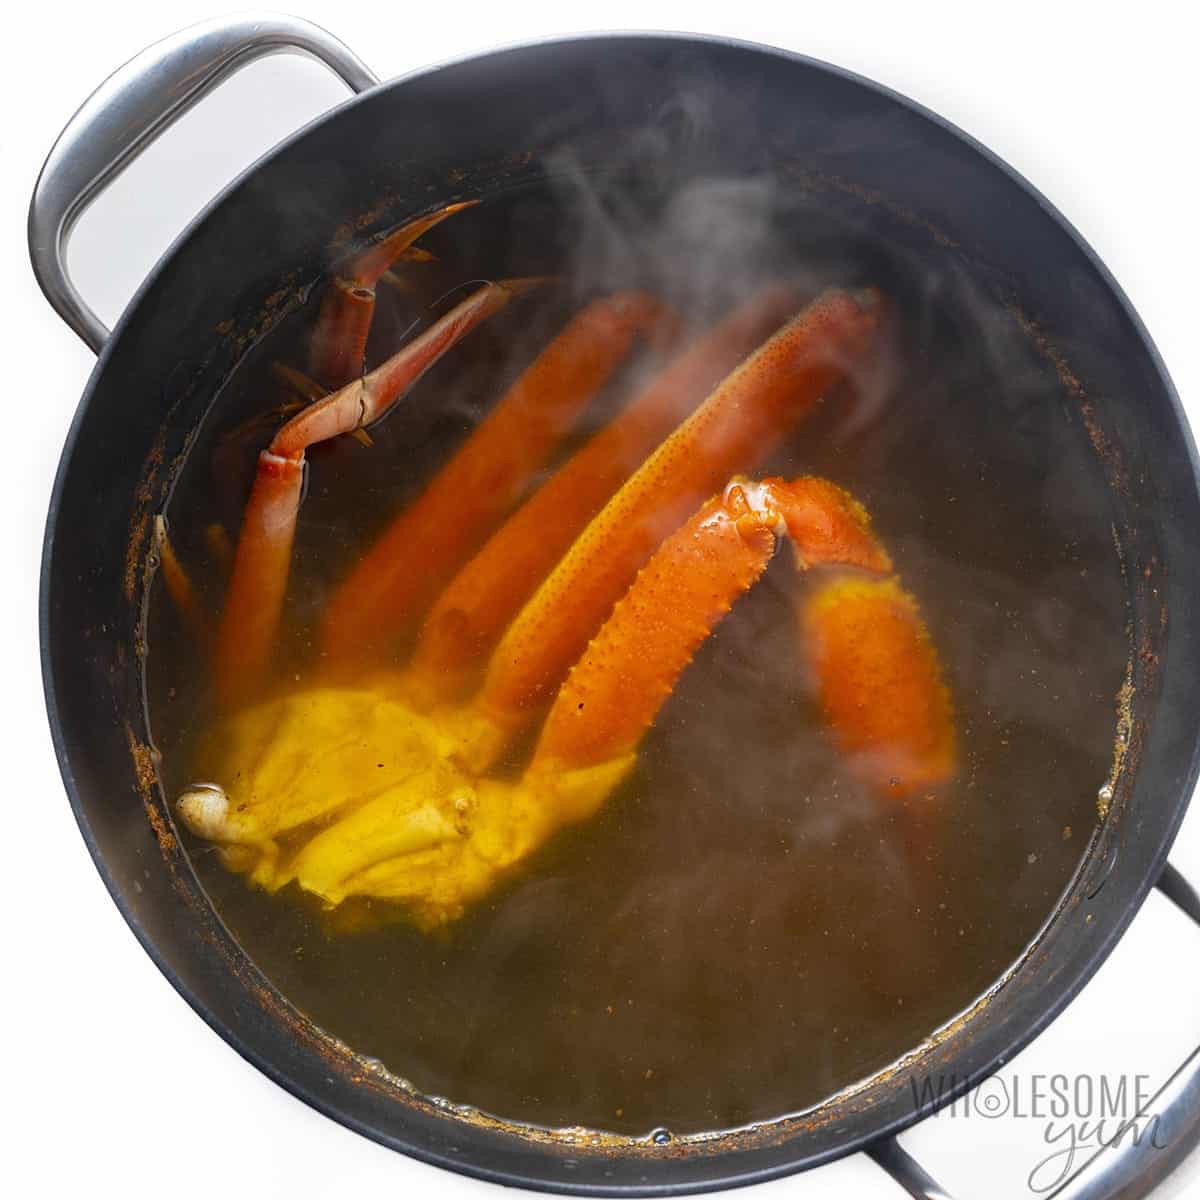 Boiled crab legs in a pot.